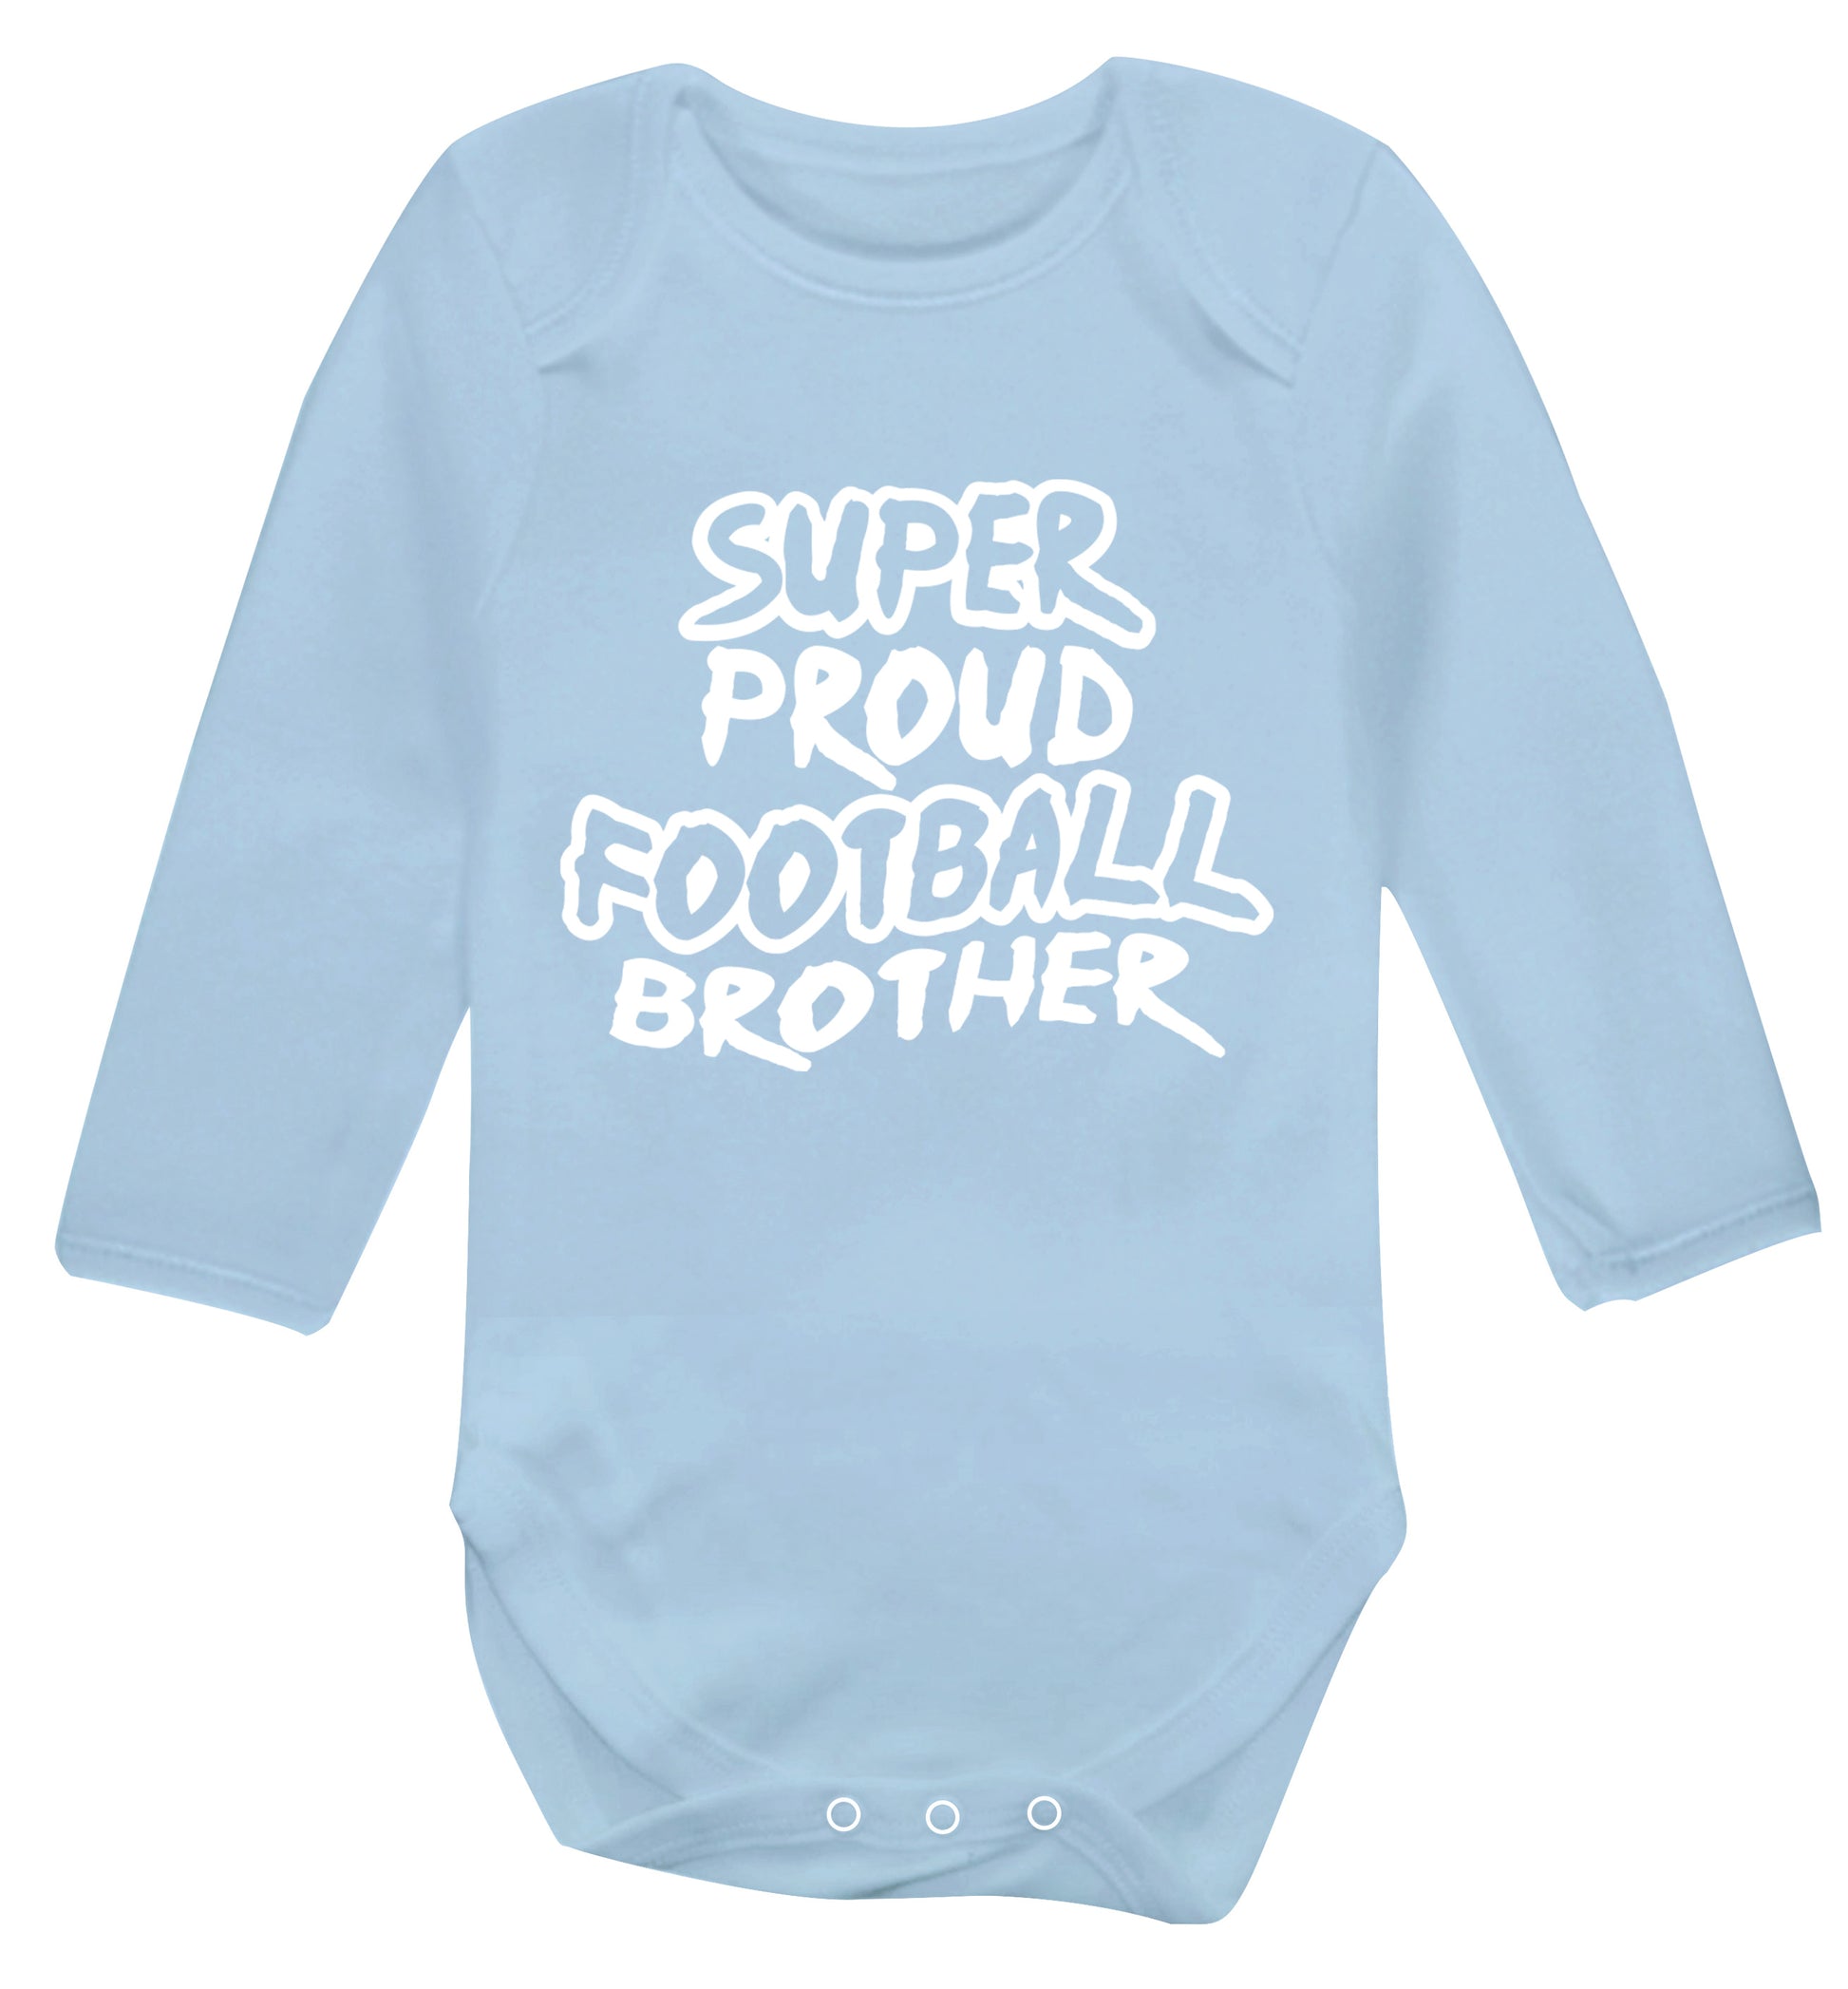 Super proud football brother Baby Vest long sleeved pale blue 6-12 months